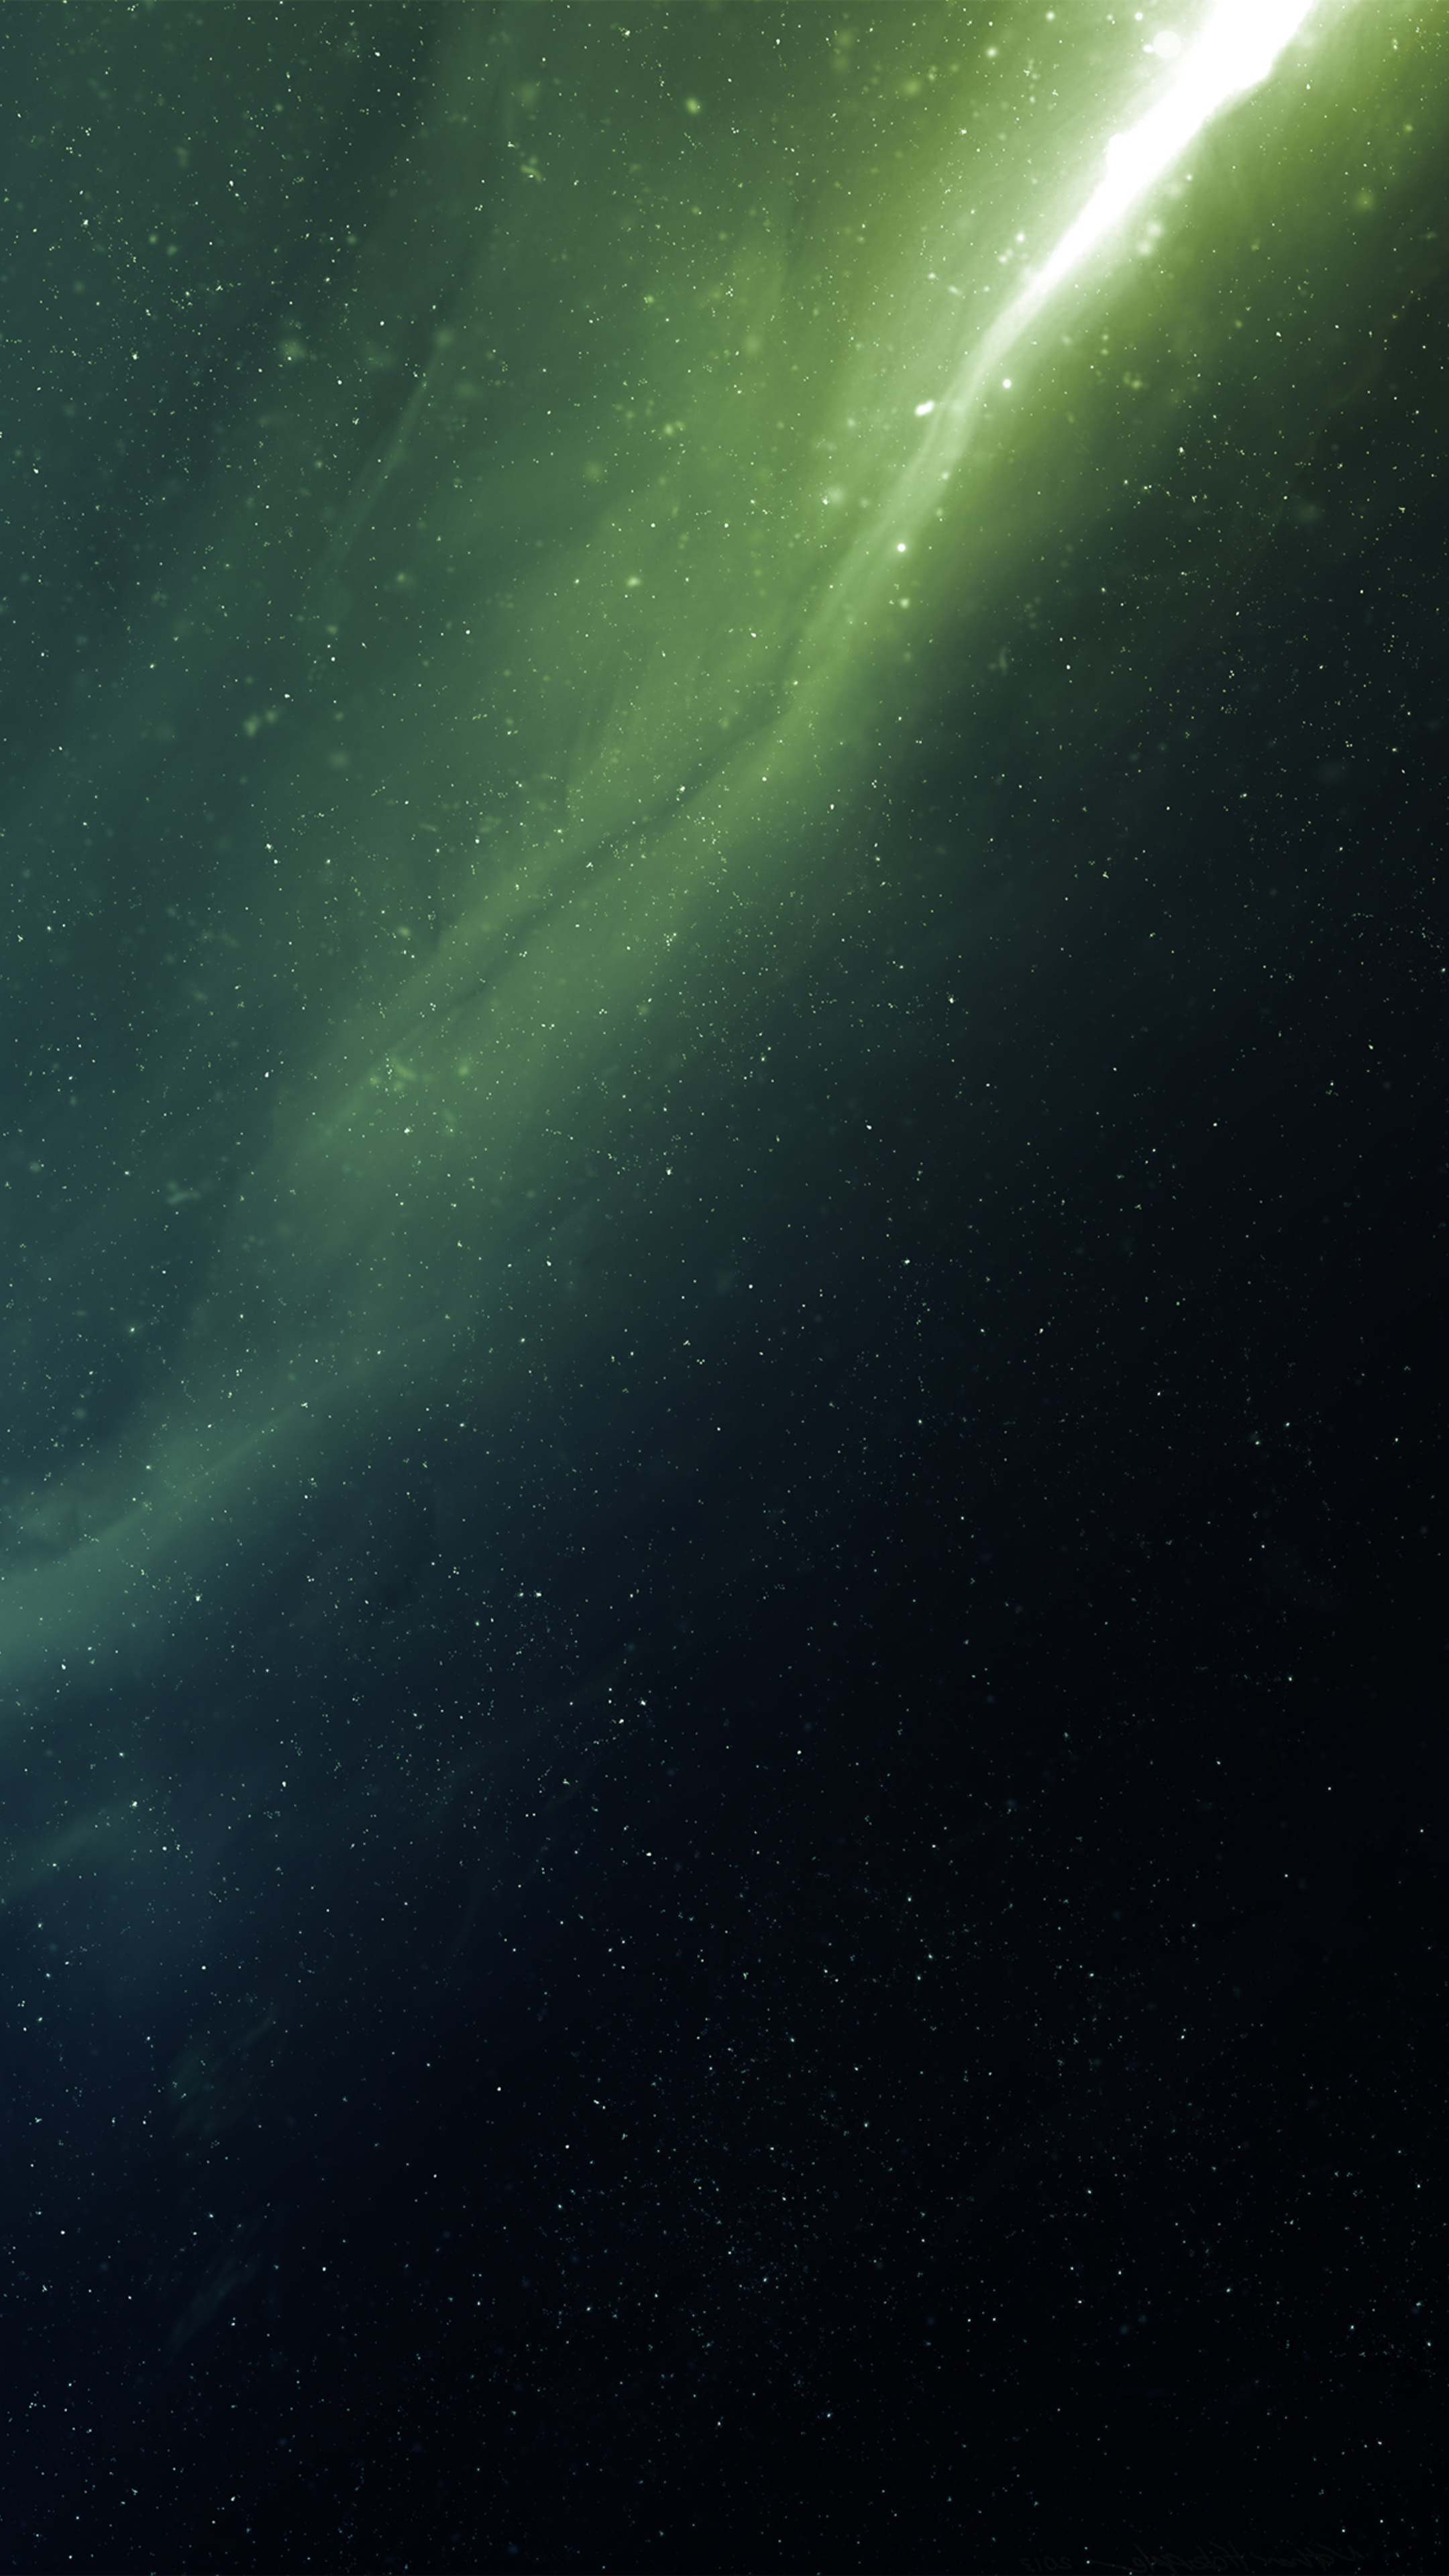 Green Nebula: The formations of gas, dust, and other materials in space. 2160x3840 4K Wallpaper.